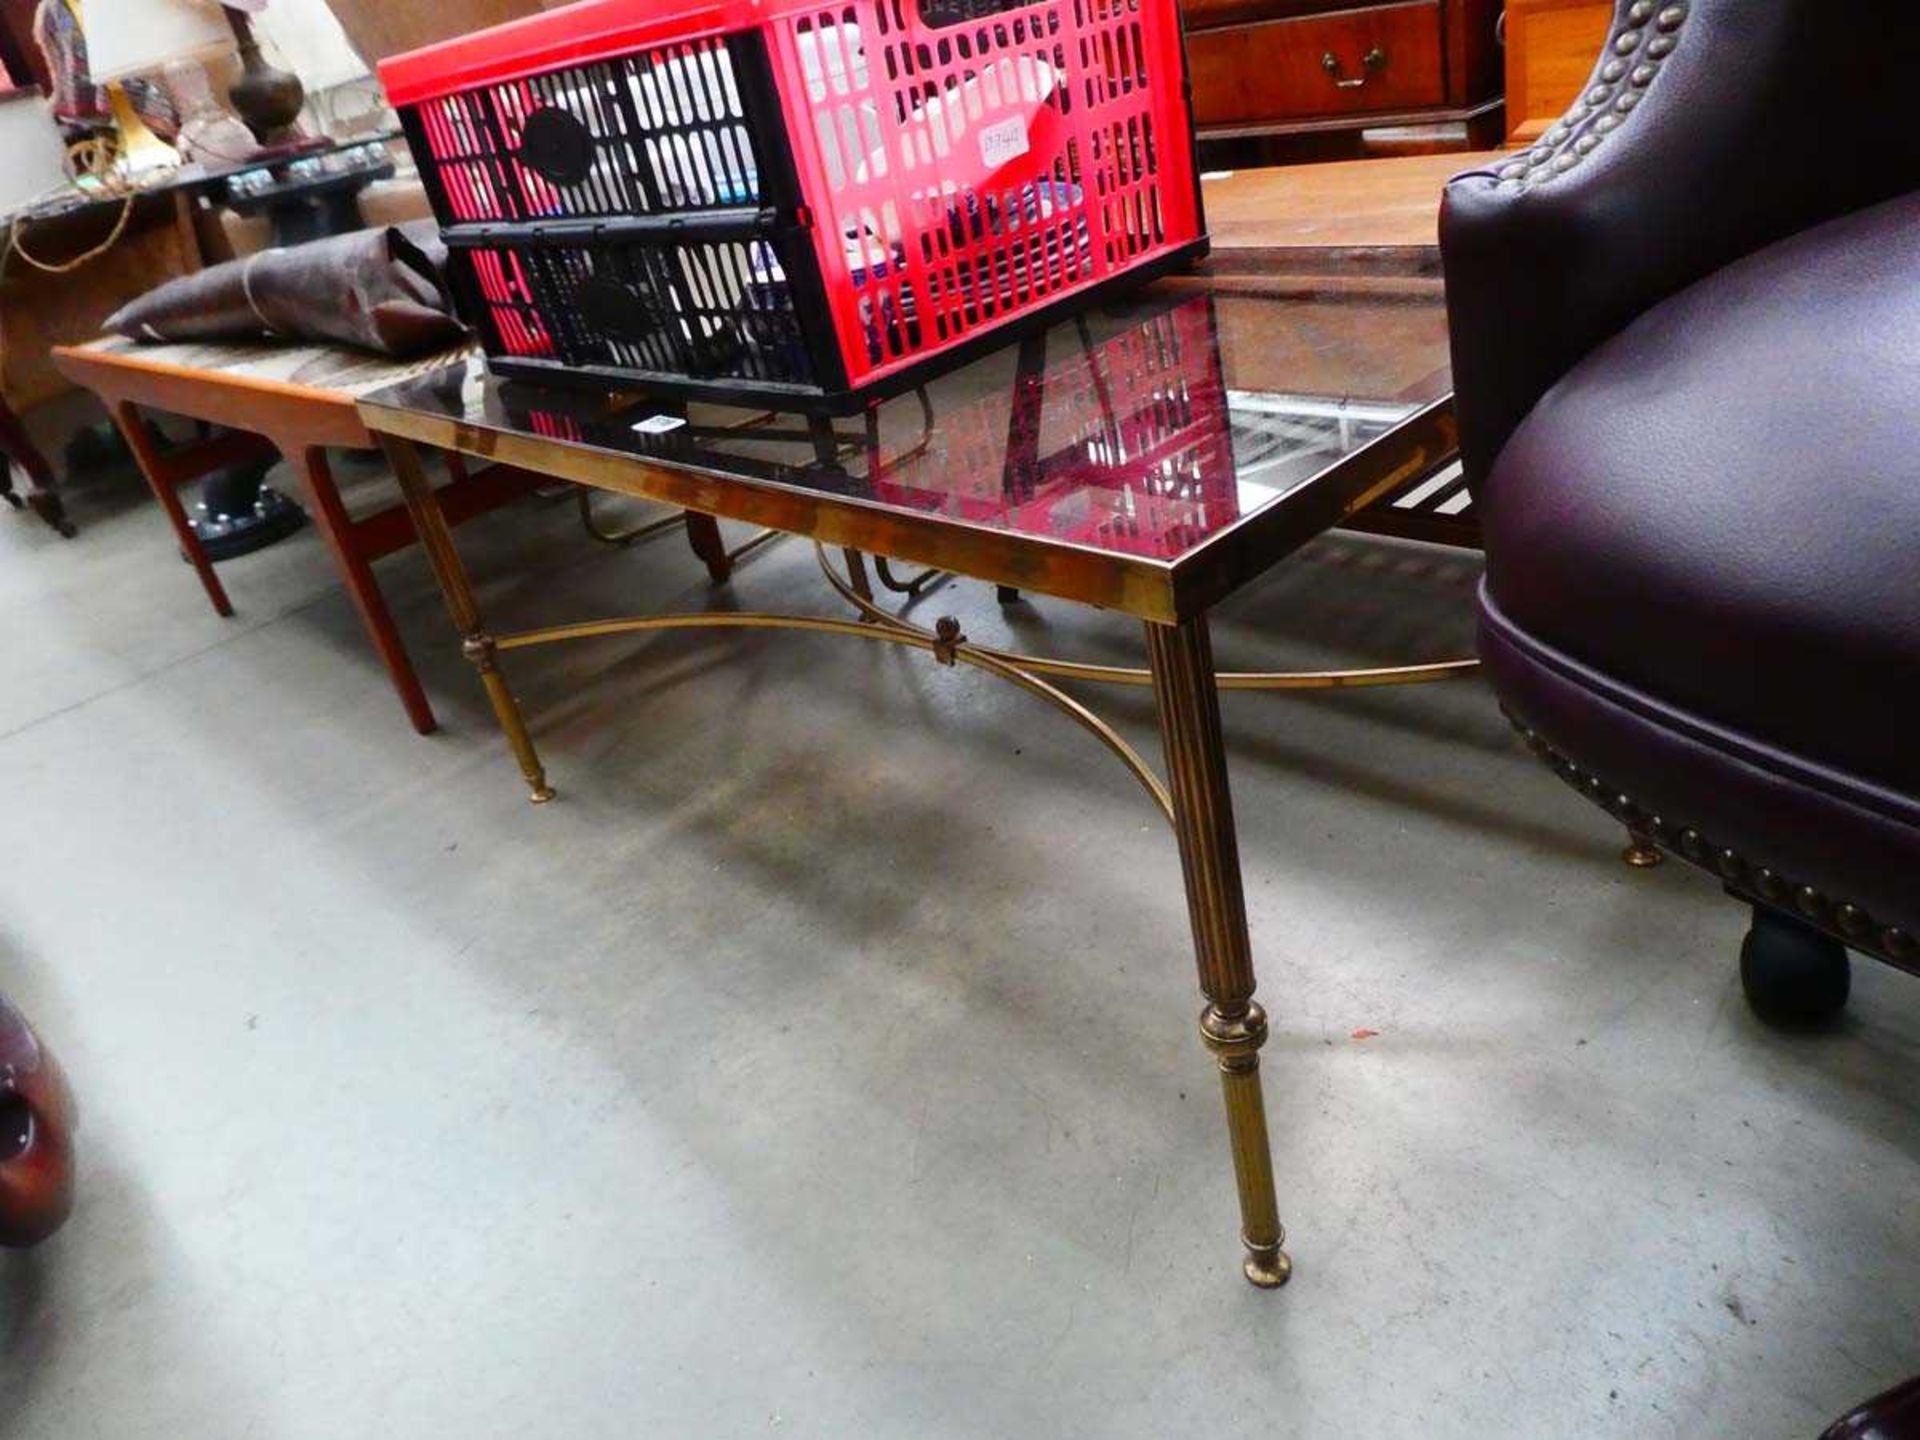 A 1980's brass finished coffee table with a rectangular smoked glass surface and reeded legs in